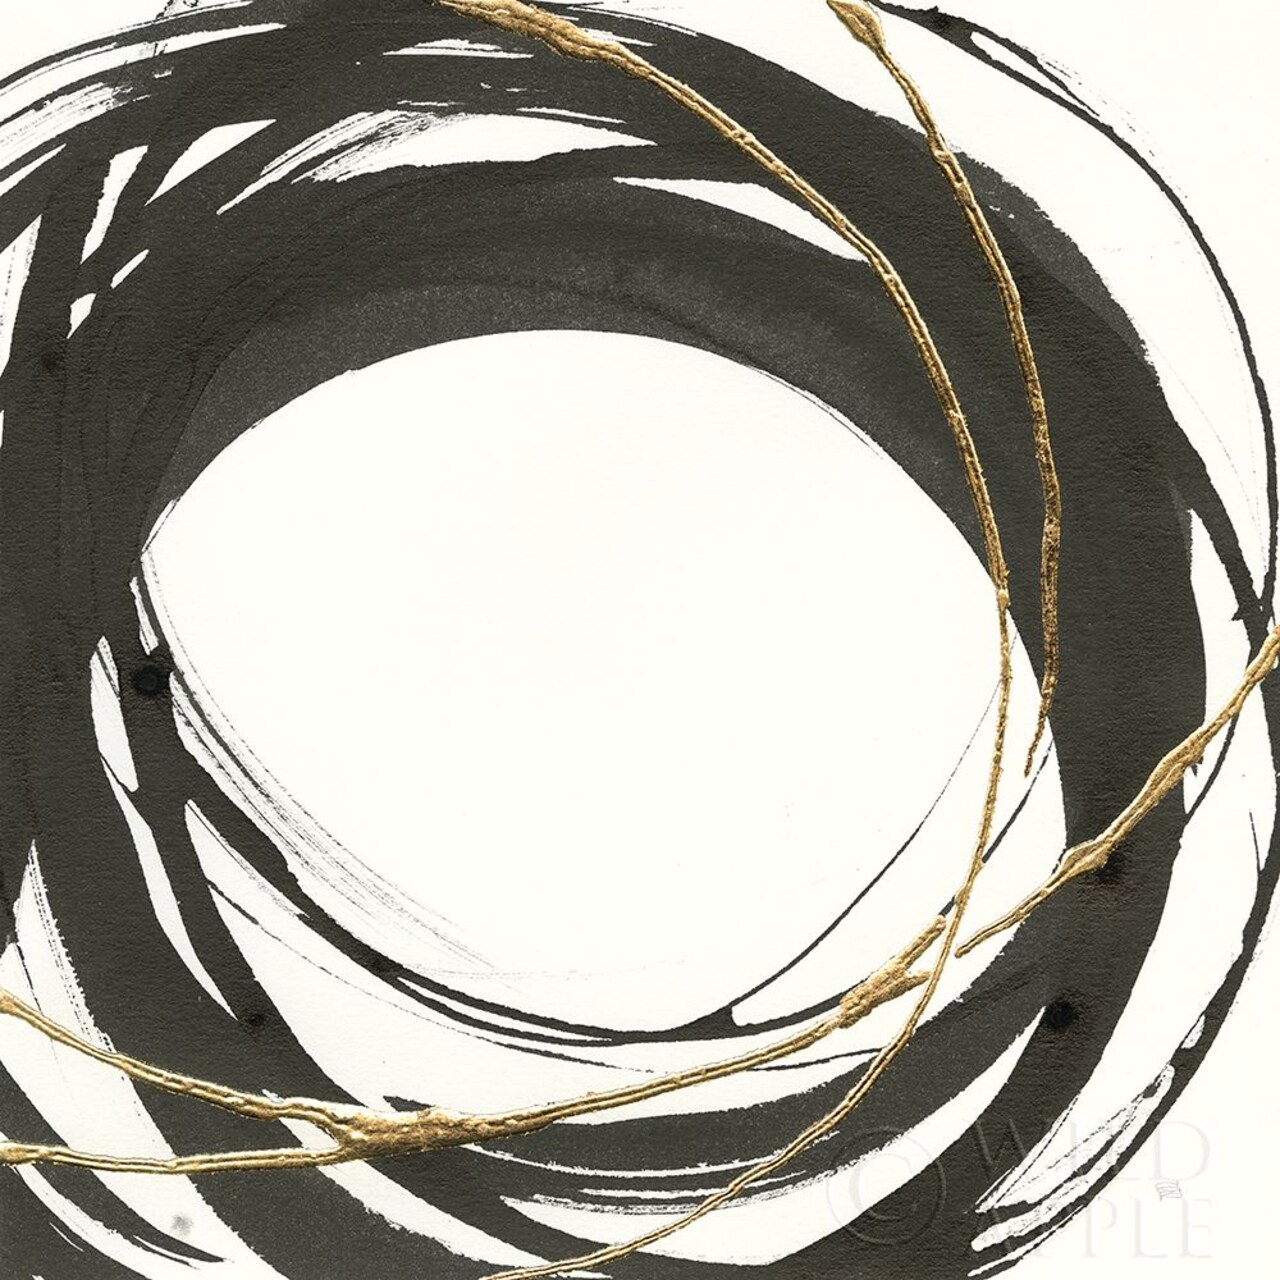 Gilded Enso Iii Poster Print by Chris Paschke - Item # VARPDX34703